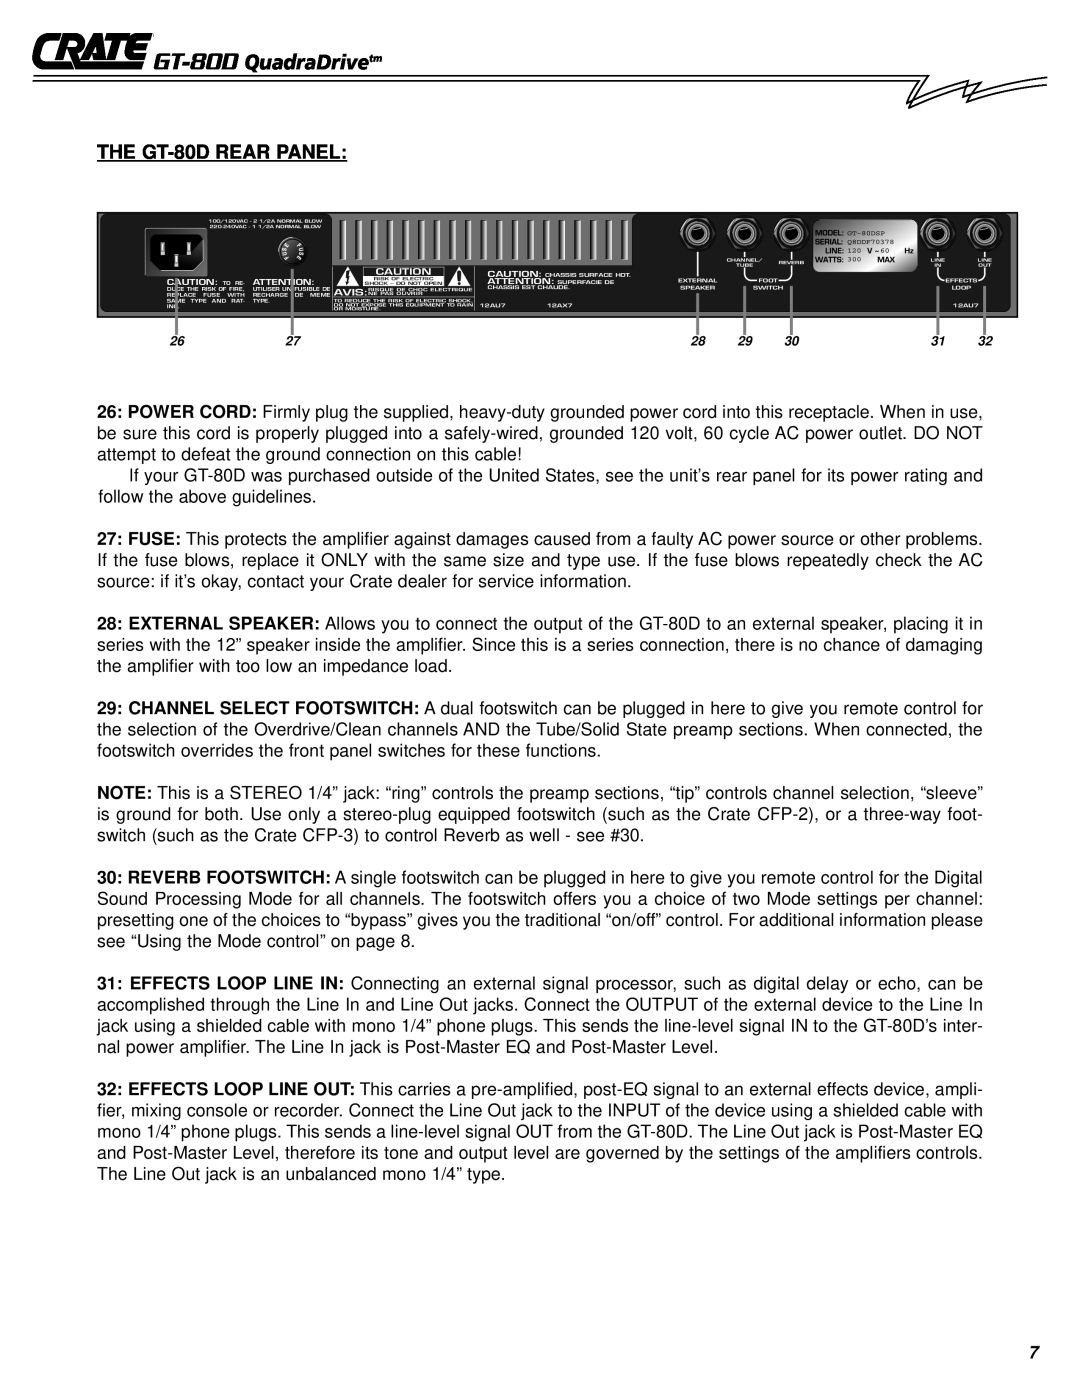 Crate Amplifiers owner manual THE GT-80DREAR PANEL, GT-80D QuadraDrivetm, Caution To Re 